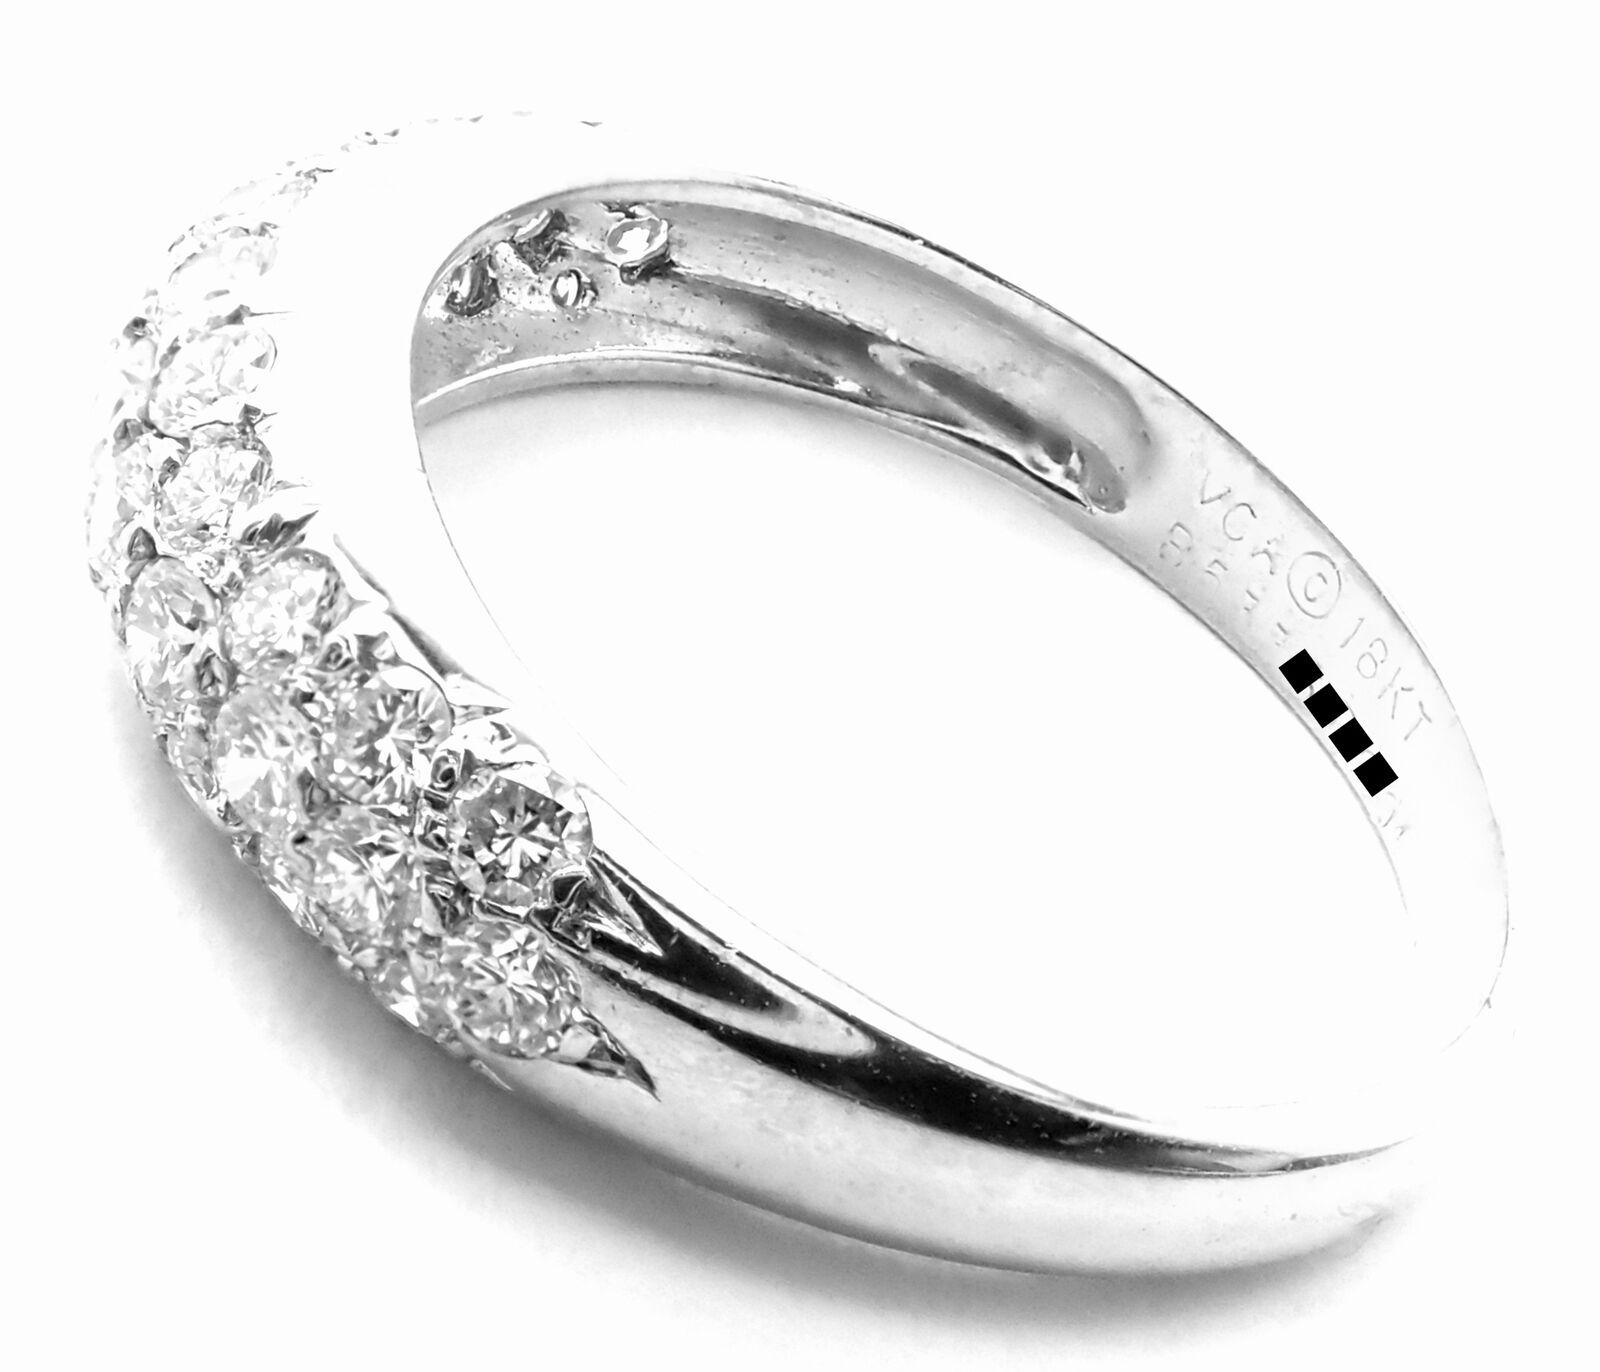 Brilliant Cut Van Cleef & Arpels Diamond White Gold Band Ring For Sale